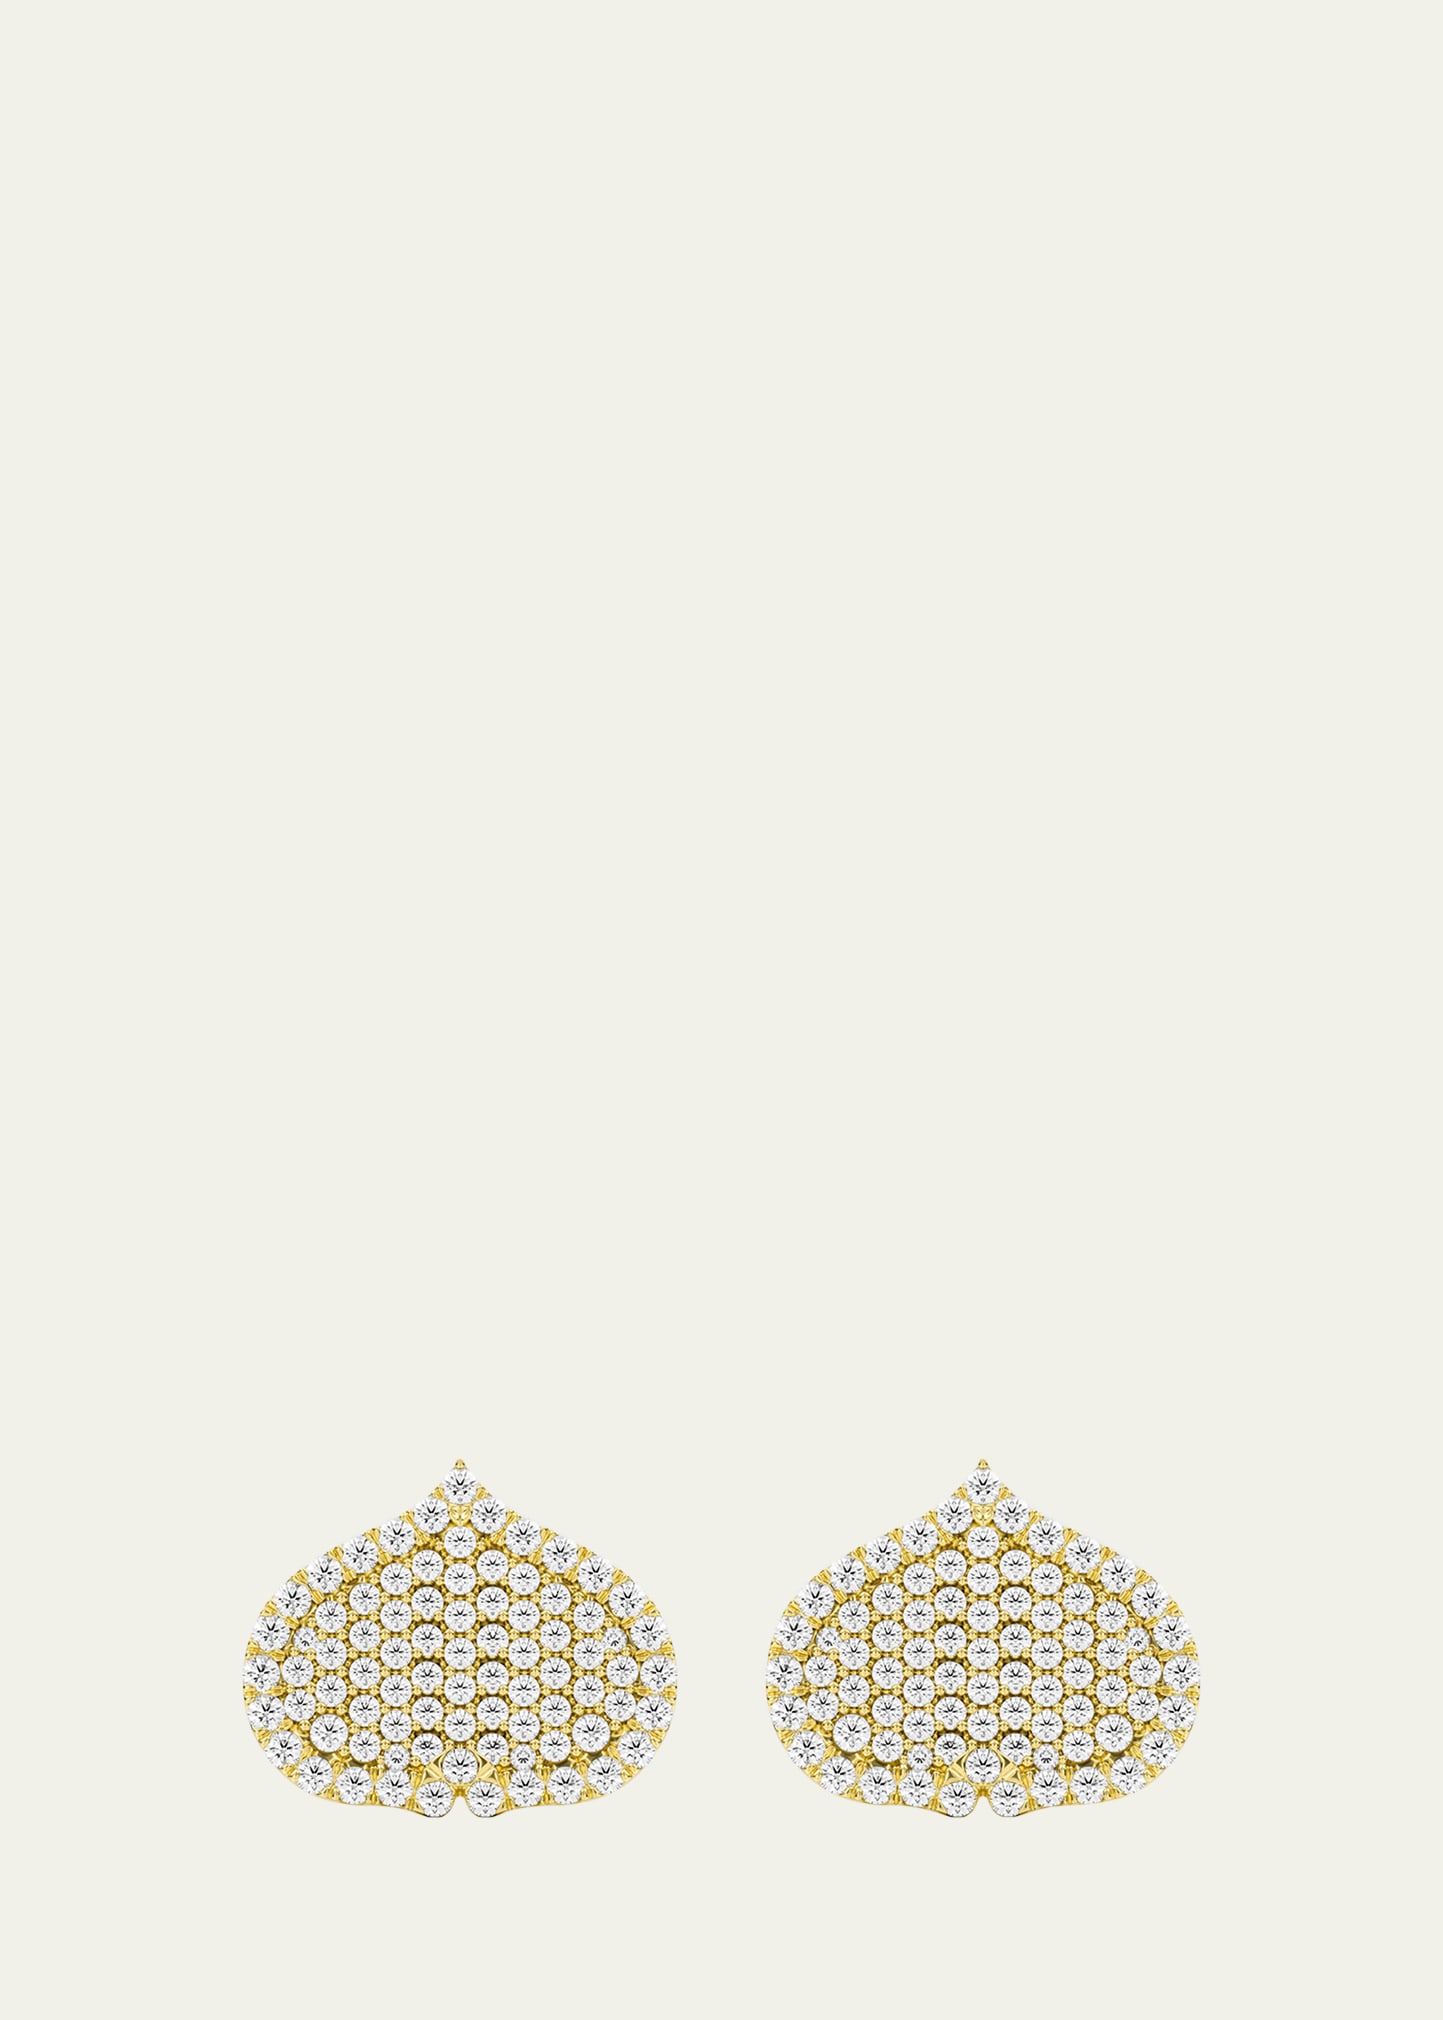 Eye Adore Stud Earrings in Gold and White Diamonds, 12mm